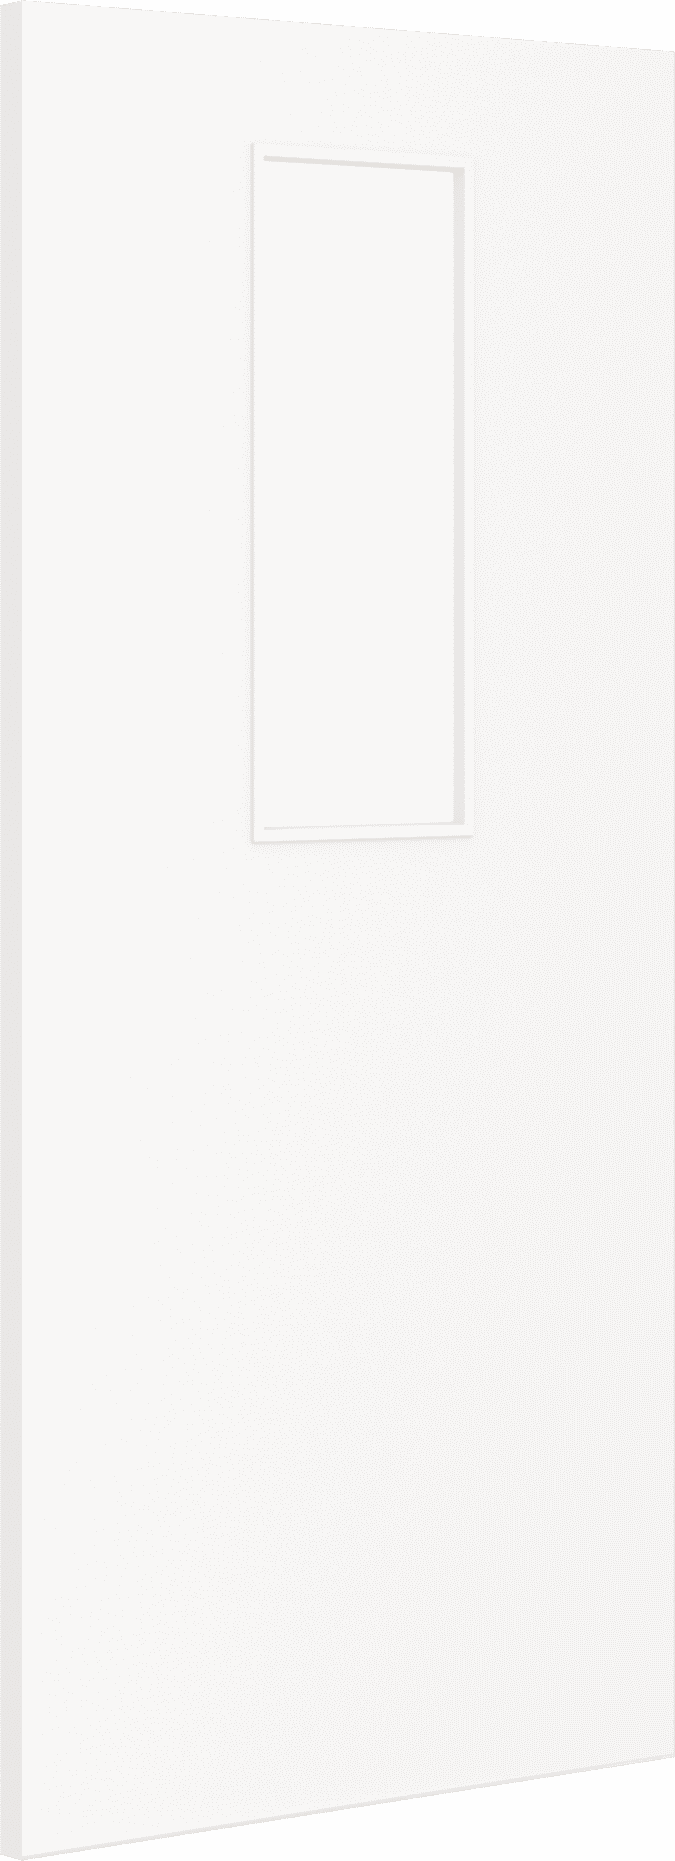 1981mm x 914mm x 44mm (36") Architectural Paint Grade White 14 Frosted Glazed Fire Door Blank